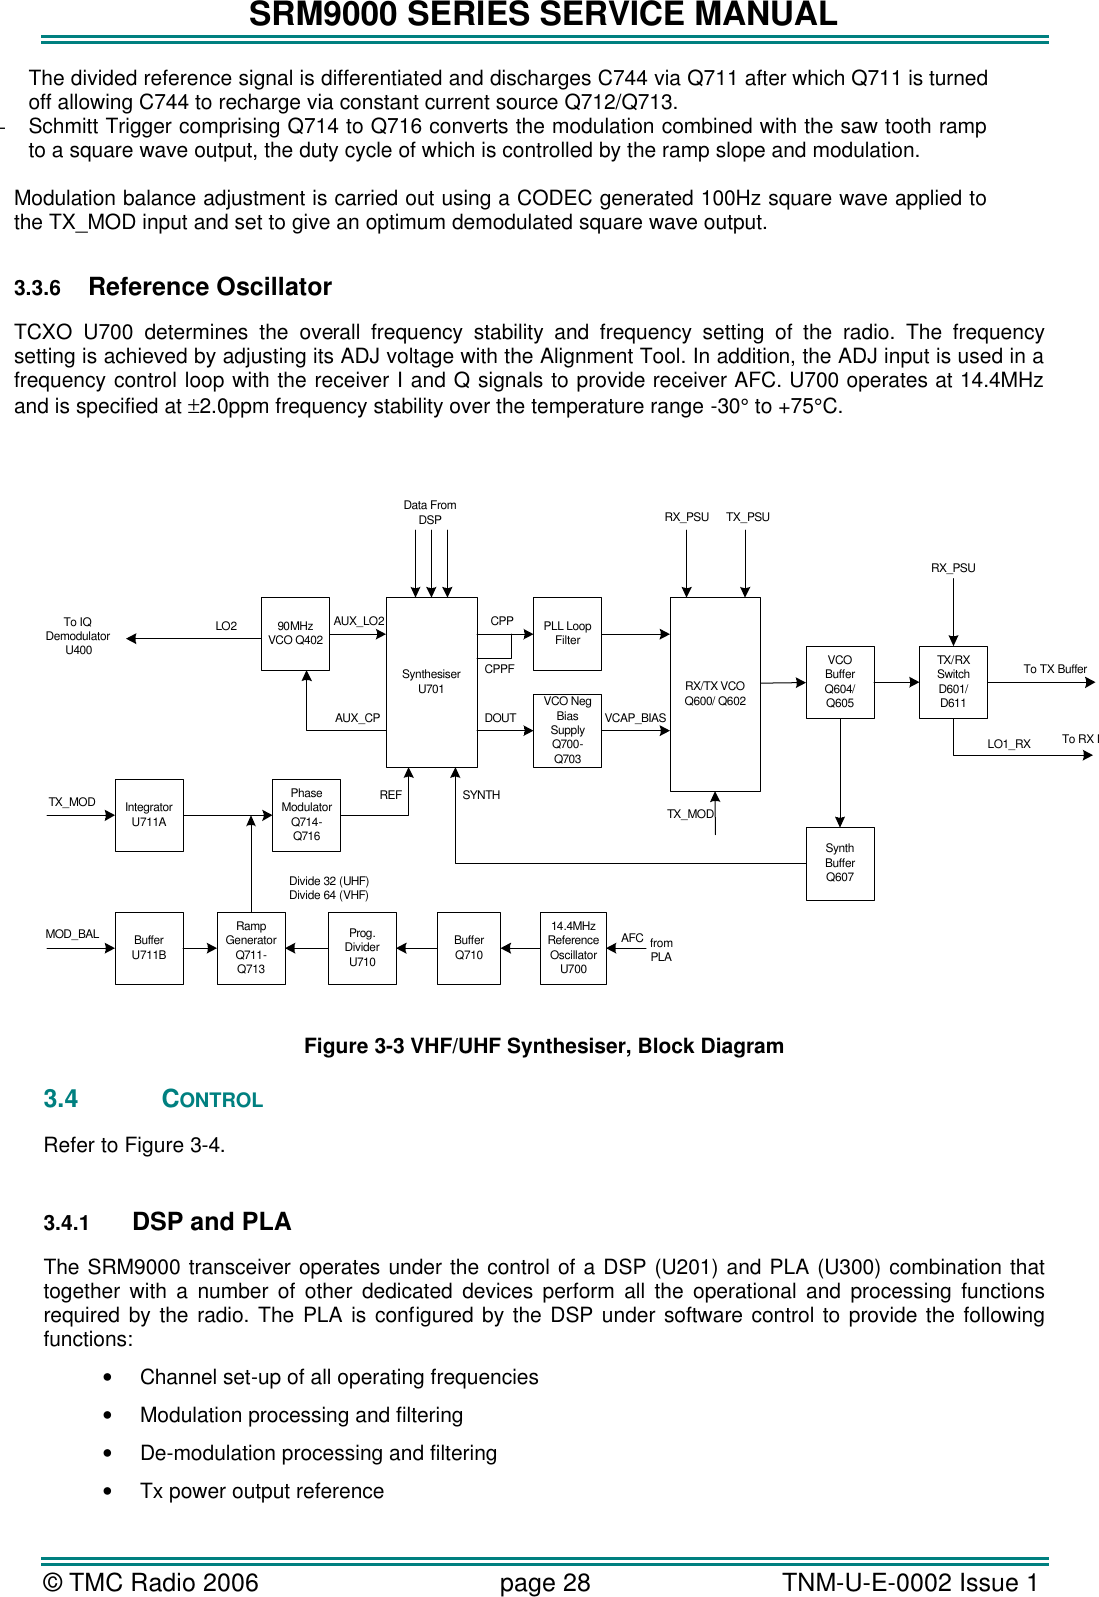 SRM9000 SERIES SERVICE MANUAL © TMC Radio 2006 page 28   TNM-U-E-0002 Issue 1  The divided reference signal is differentiated and discharges C744 via Q711 after which Q711 is turned off allowing C744 to recharge via constant current source Q712/Q713. - Schmitt Trigger comprising Q714 to Q716 converts the modulation combined with the saw tooth ramp to a square wave output, the duty cycle of which is controlled by the ramp slope and modulation.  Modulation balance adjustment is carried out using a CODEC generated 100Hz square wave applied to the TX_MOD input and set to give an optimum demodulated square wave output.   3.3.6 Reference Oscillator TCXO U700 determines the overall frequency stability and frequency setting of the radio. The frequency setting is achieved by adjusting its ADJ voltage with the Alignment Tool. In addition, the ADJ input is used in a frequency control loop with the receiver I and Q signals to provide receiver AFC. U700 operates at 14.4MHz and is specified at ±2.0ppm frequency stability over the temperature range -30° to +75°C.    90MHz VCO Q402SynthesiserU701 RX/TX VCO Q600/ Q602TX/RX Switch D601/D611VCO Buffer Q604/Q605Data From DSPPhase ModulatorQ714-Q716Ramp Generator Q711-Q713IntegratorU711ATX_MODMOD_BAL Prog. Divider U710 Buffer Q71014.4MHzReference Oscillator U700To TX BufferREFPLL Loop FilterVCO Neg Bias Supply Q700-Q703CPPCPPFDOUT VCAP_BIASAUX_LO2AUX_CPDivide 32 (UHF)Divide 64 (VHF)Synth Buffer Q607SYNTHLO1_RXTX_MODTo IQ Demodulator U400LO2AFC  from PLATo RX MixerBufferU711BRX_PSURX_PSU TX_PSU Figure 3-3 VHF/UHF Synthesiser, Block Diagram 3.4 CONTROL Refer to Figure 3-4.  3.4.1 DSP and PLA The SRM9000 transceiver operates under the control of a DSP (U201) and PLA (U300) combination that together with a number of other dedicated devices perform all the operational and processing functions required by the radio. The PLA is configured by the DSP under software control to provide the following functions: • Channel set-up of all operating frequencies  • Modulation processing and filtering  • De-modulation processing and filtering  • Tx power output reference 